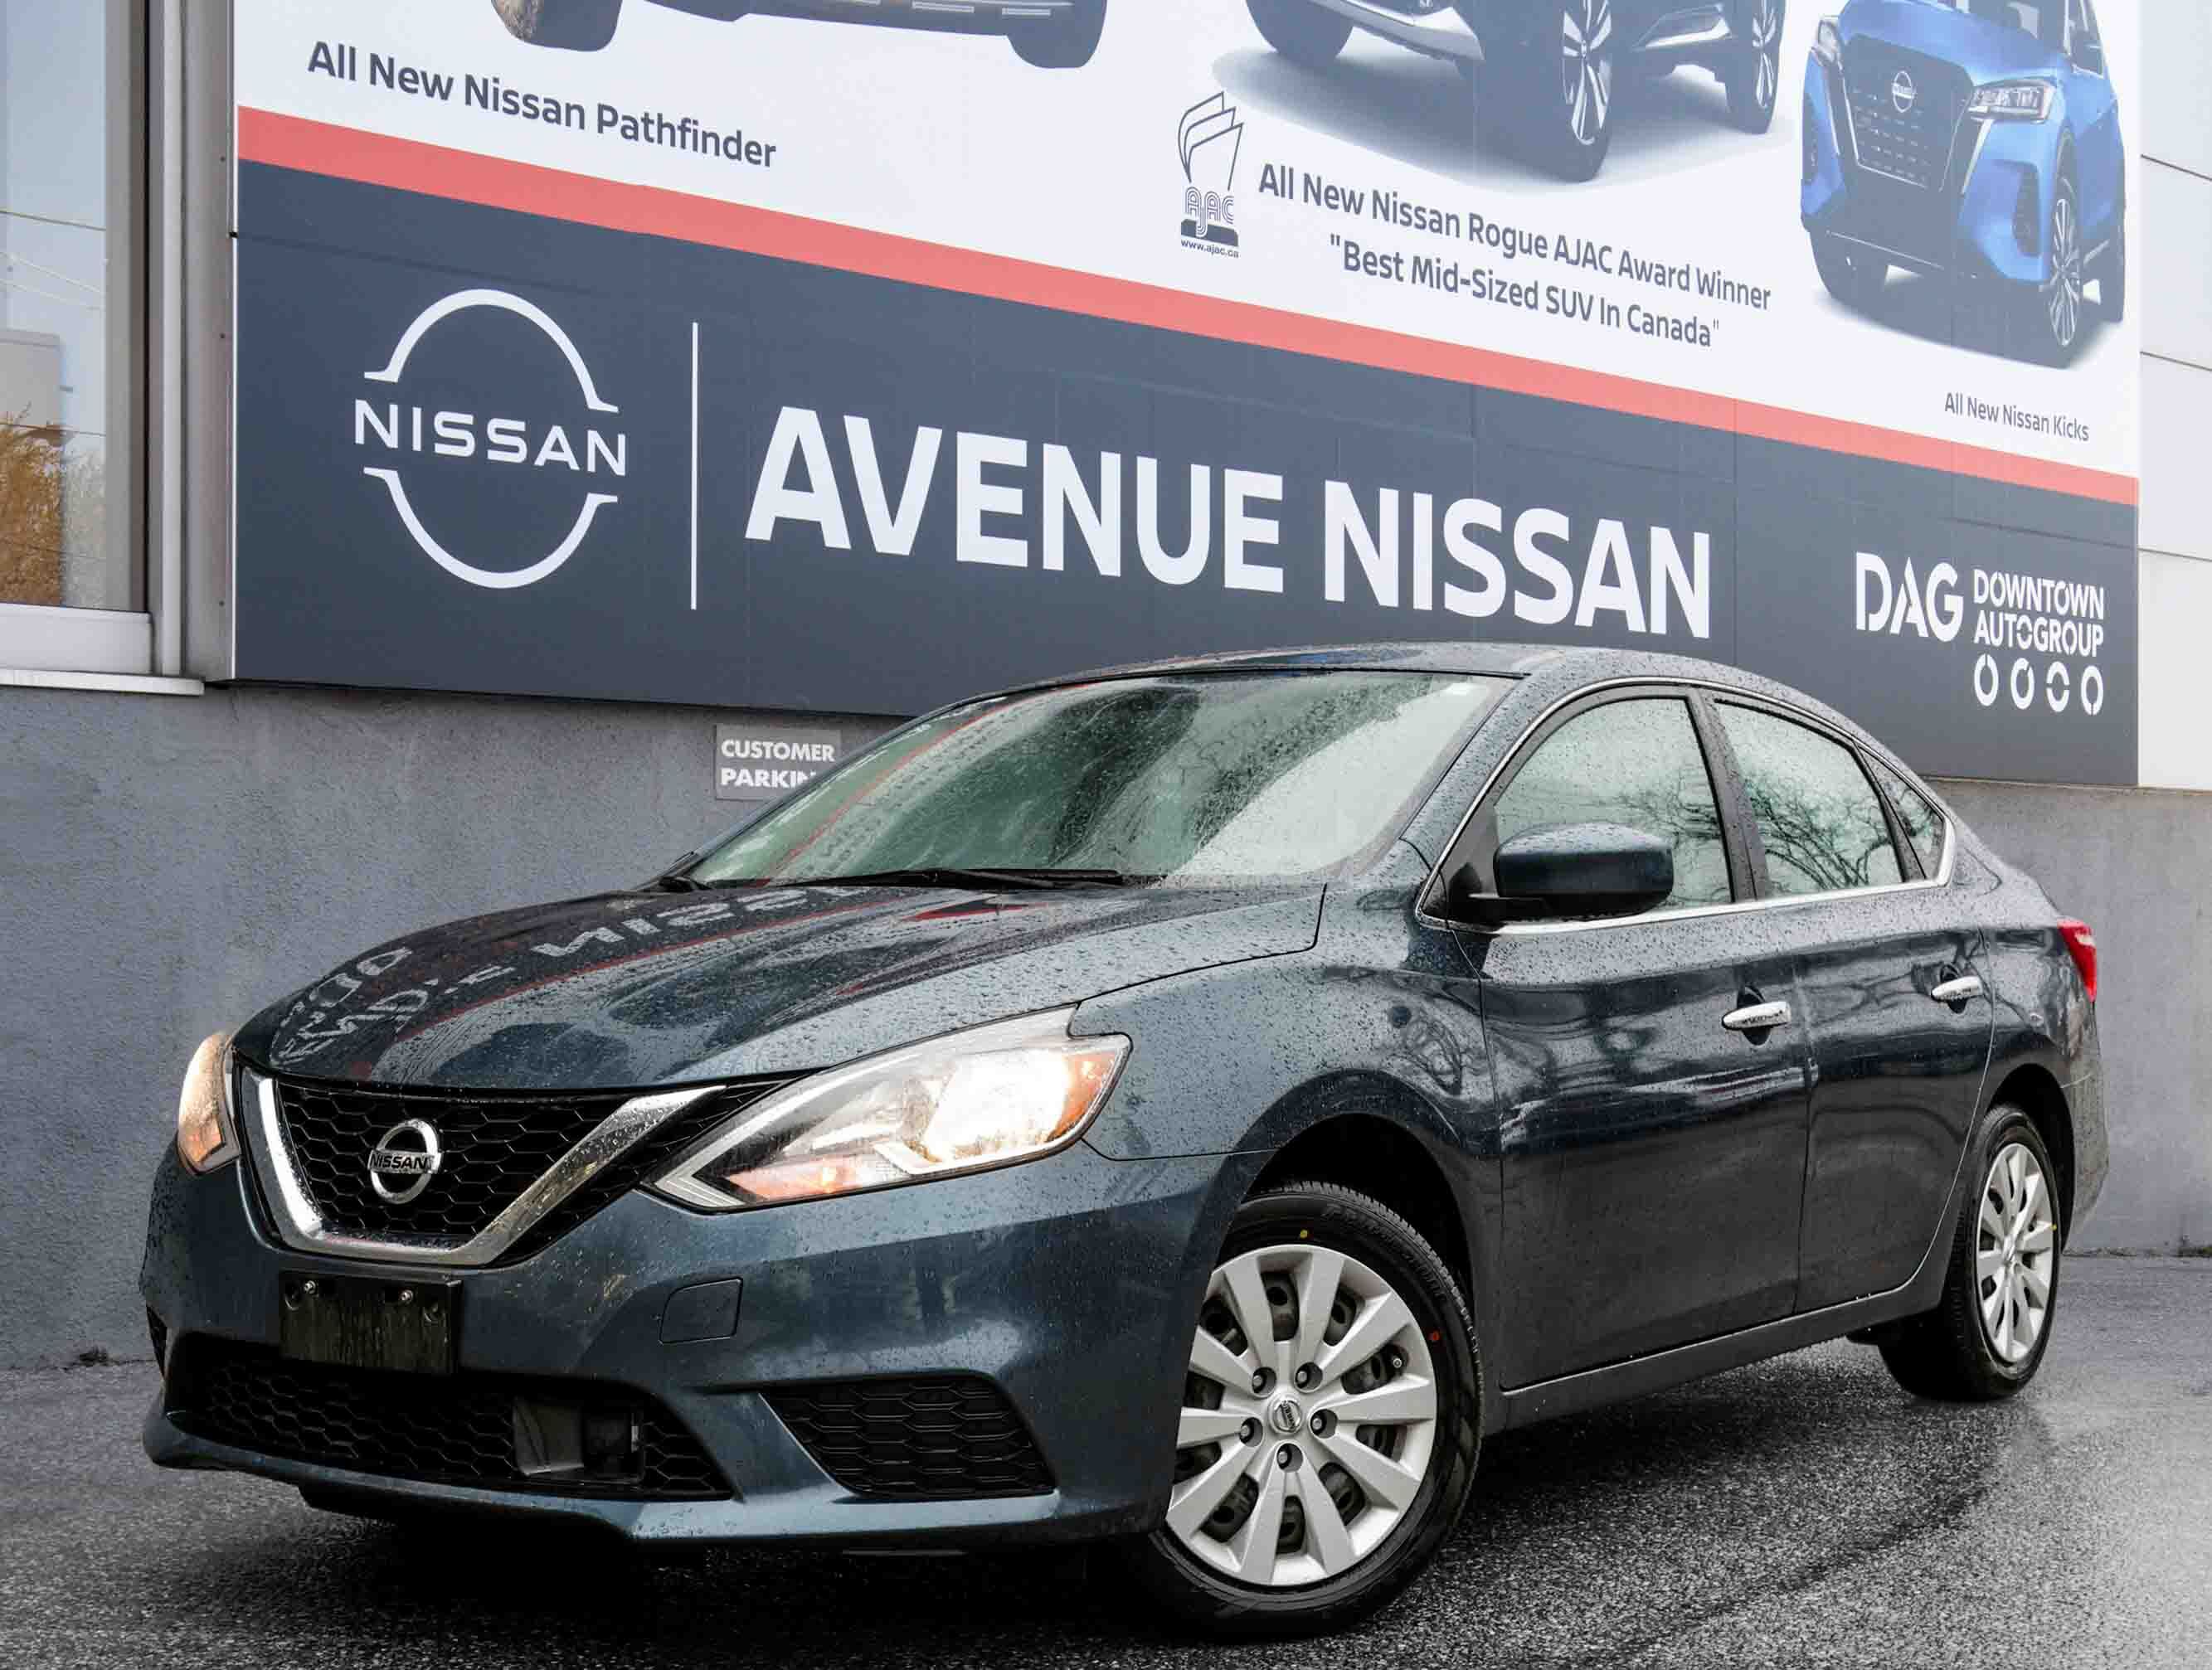 2018 Nissan Sentra LOW KM'S, NISSAN CPO, GREAT ON GAS, WELL EQUIPPED